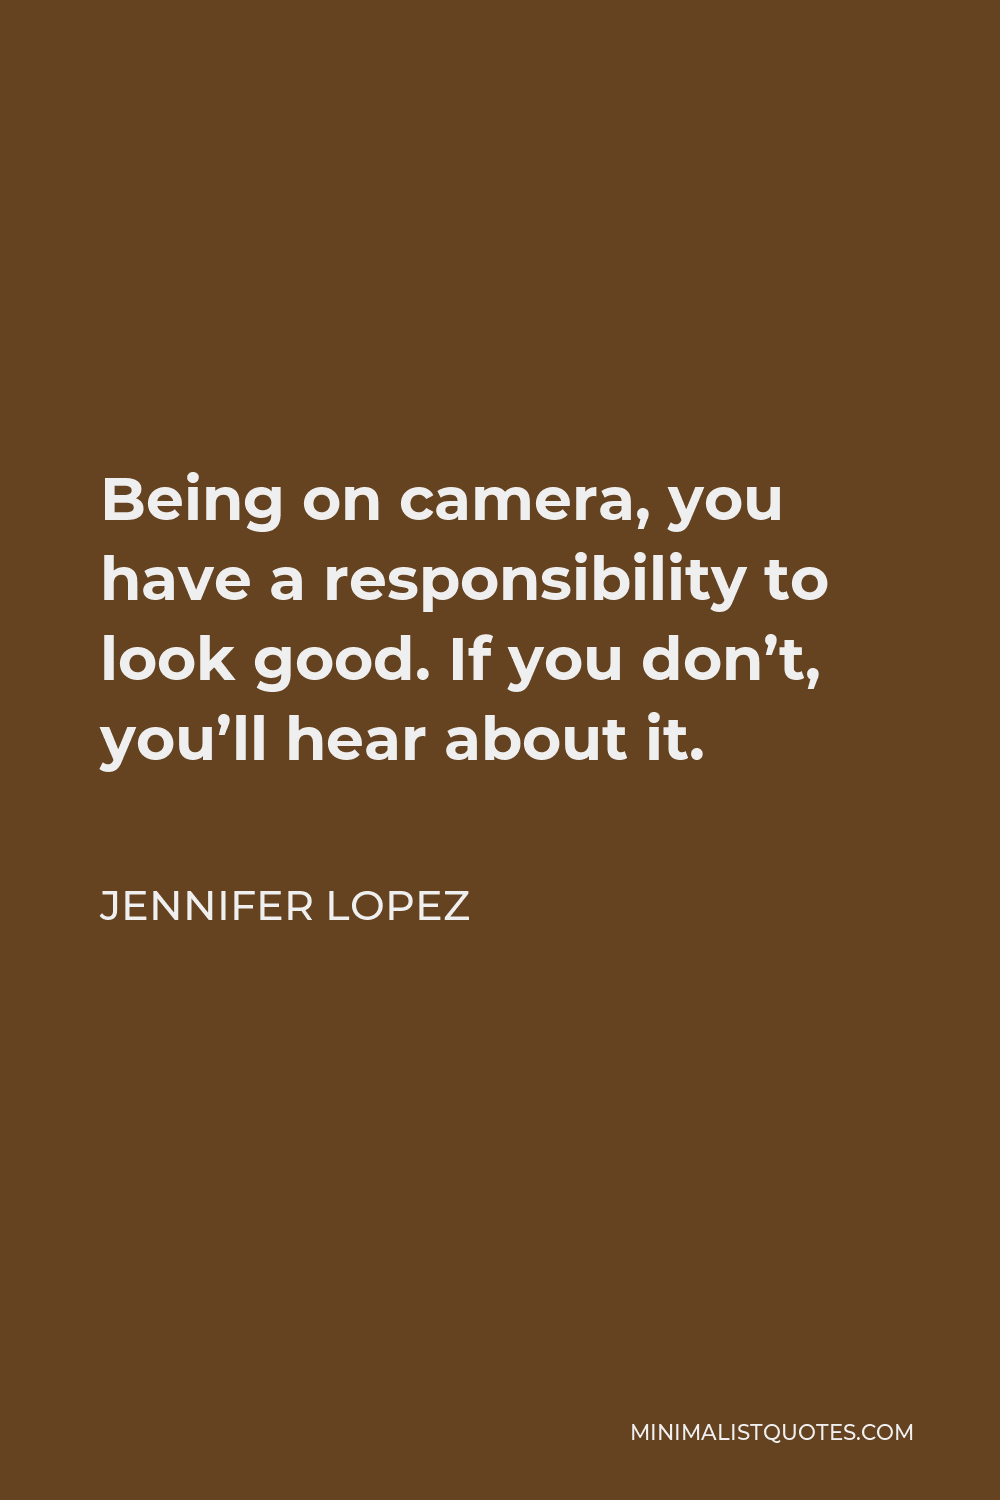 Jennifer Lopez Quote - Being on camera, you have a responsibility to look good. If you don’t, you’ll hear about it.